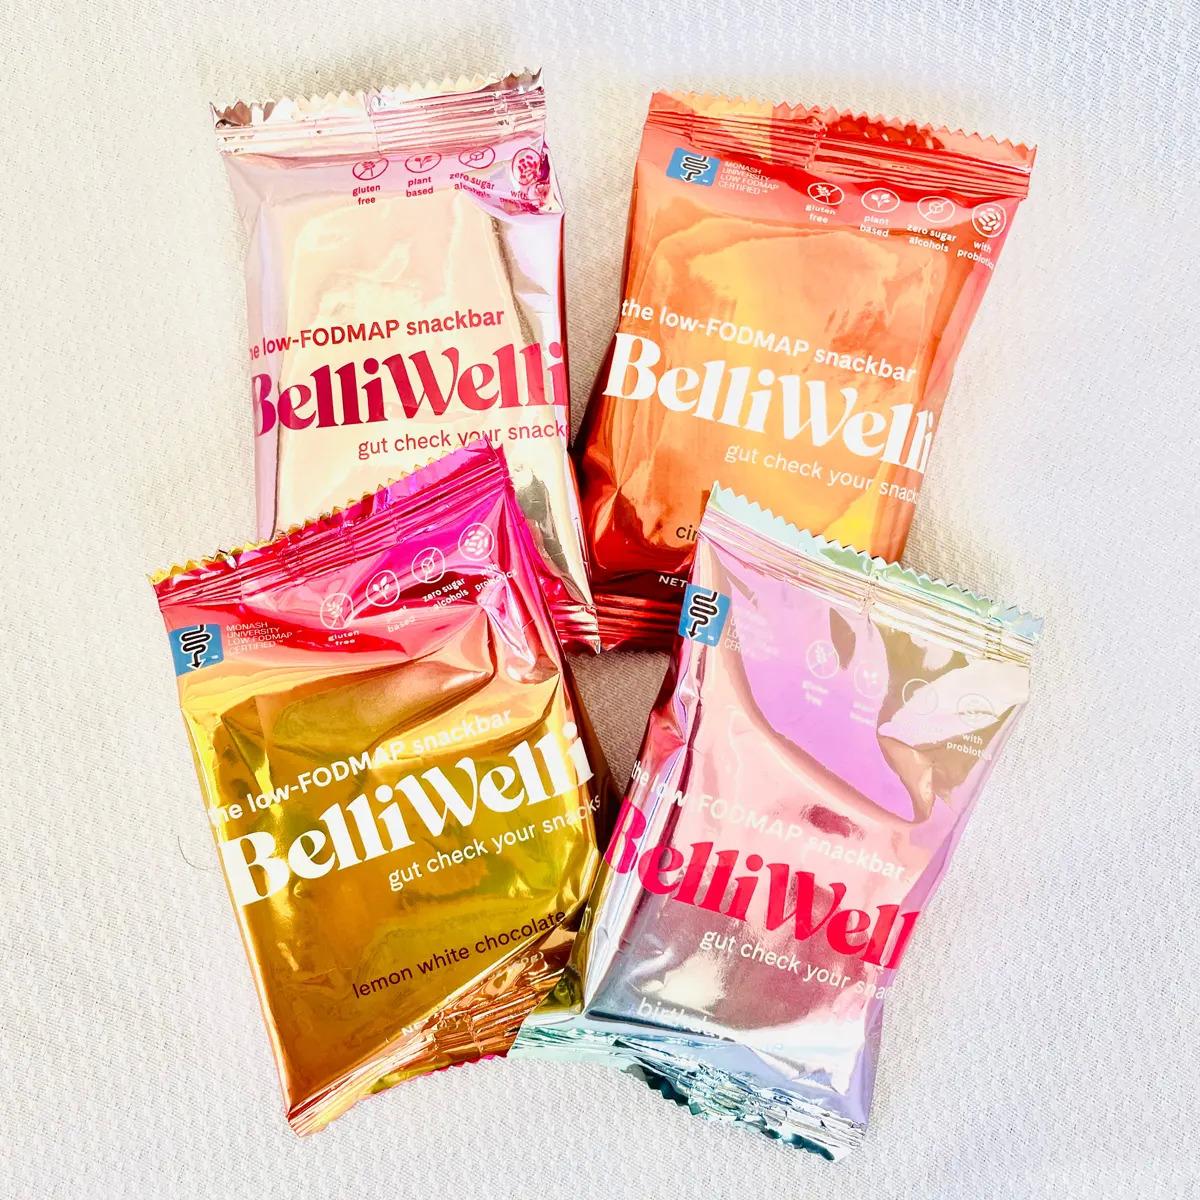 4 BelliWelli Snack Bars for Free After Rebate